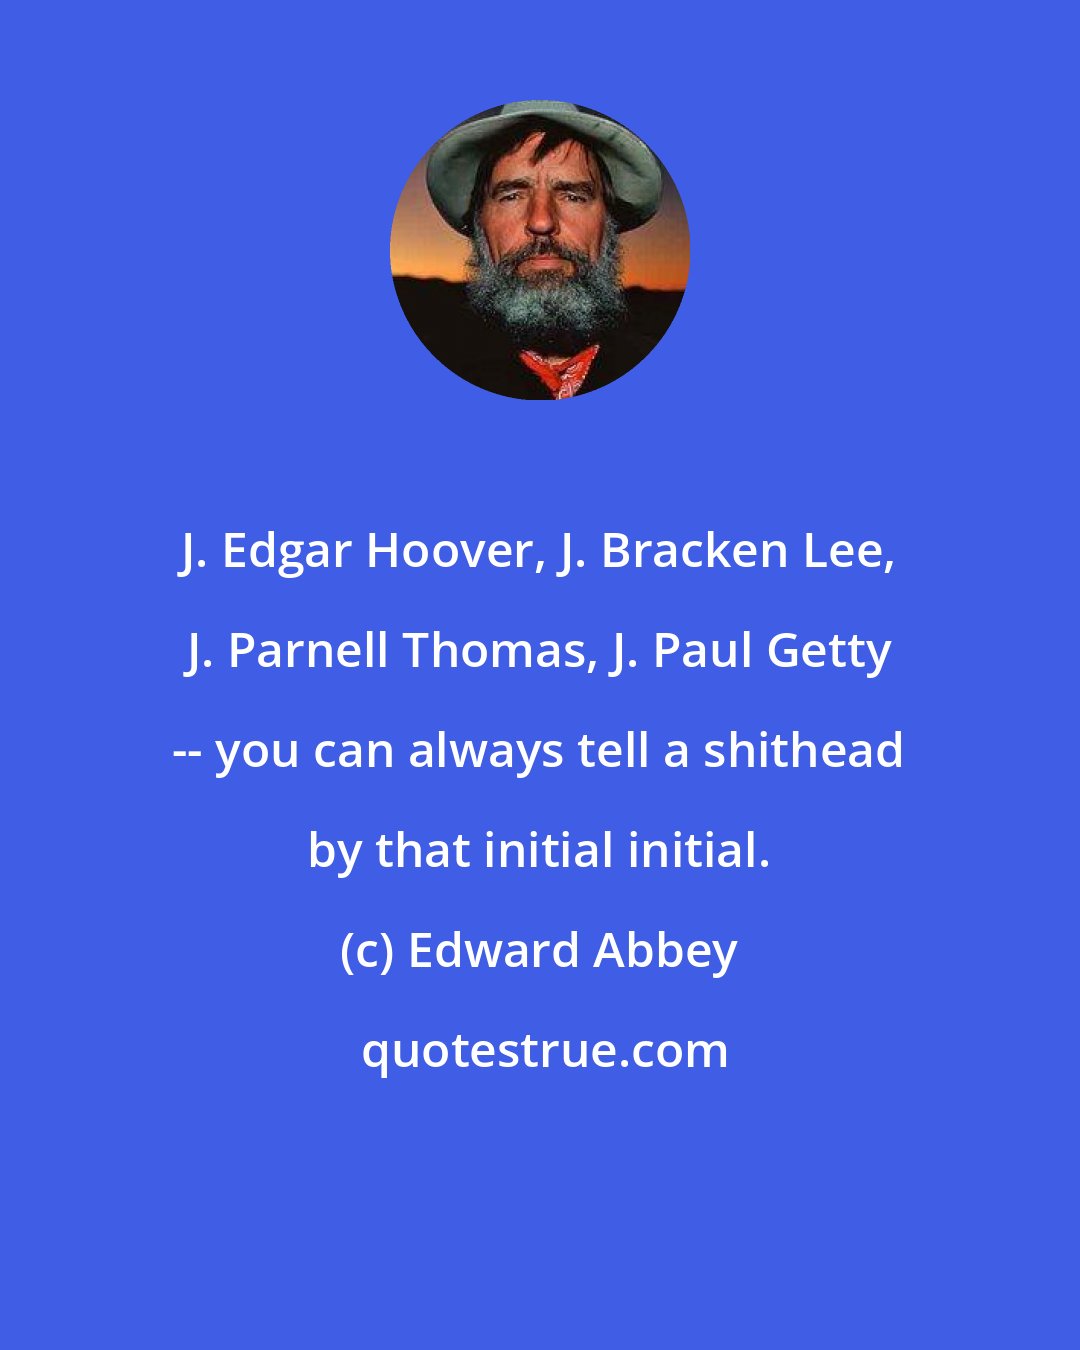 Edward Abbey: J. Edgar Hoover, J. Bracken Lee, J. Parnell Thomas, J. Paul Getty -- you can always tell a shithead by that initial initial.